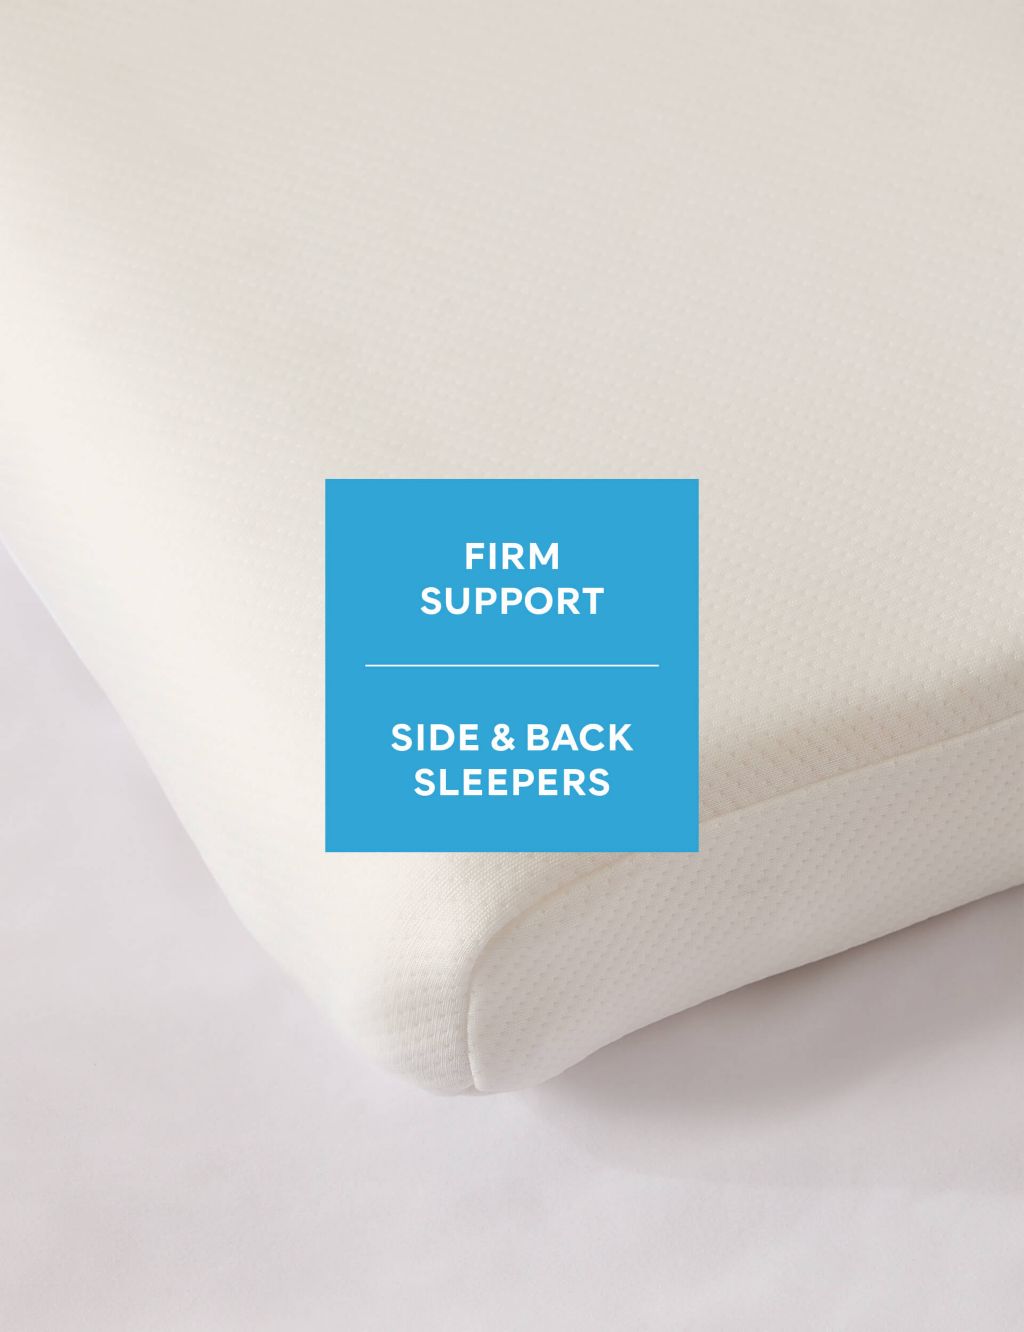 Cooling Contour Memory Foam Pillow 1 of 3